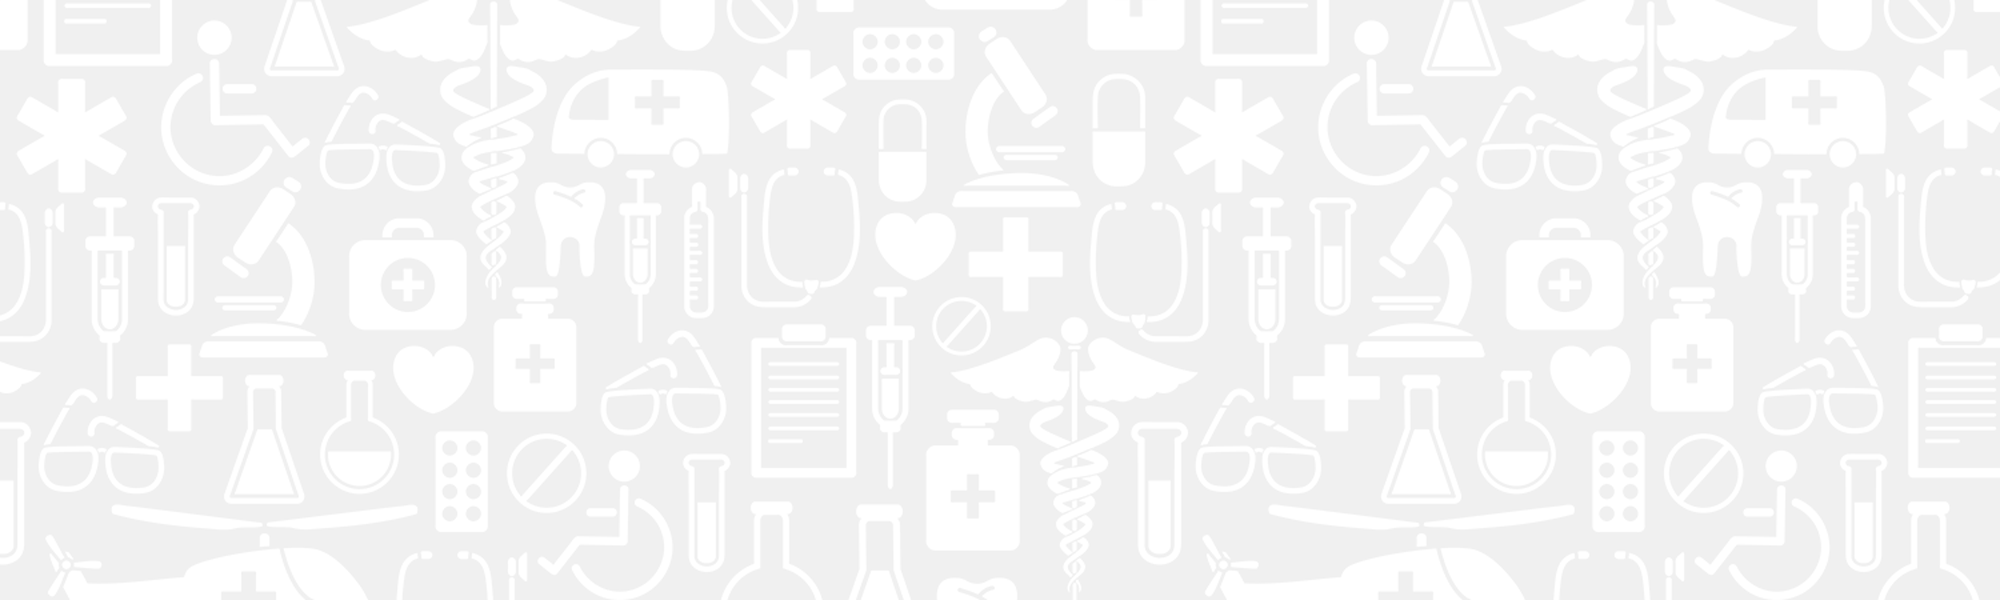 Grid pattern of medical symbols and tools